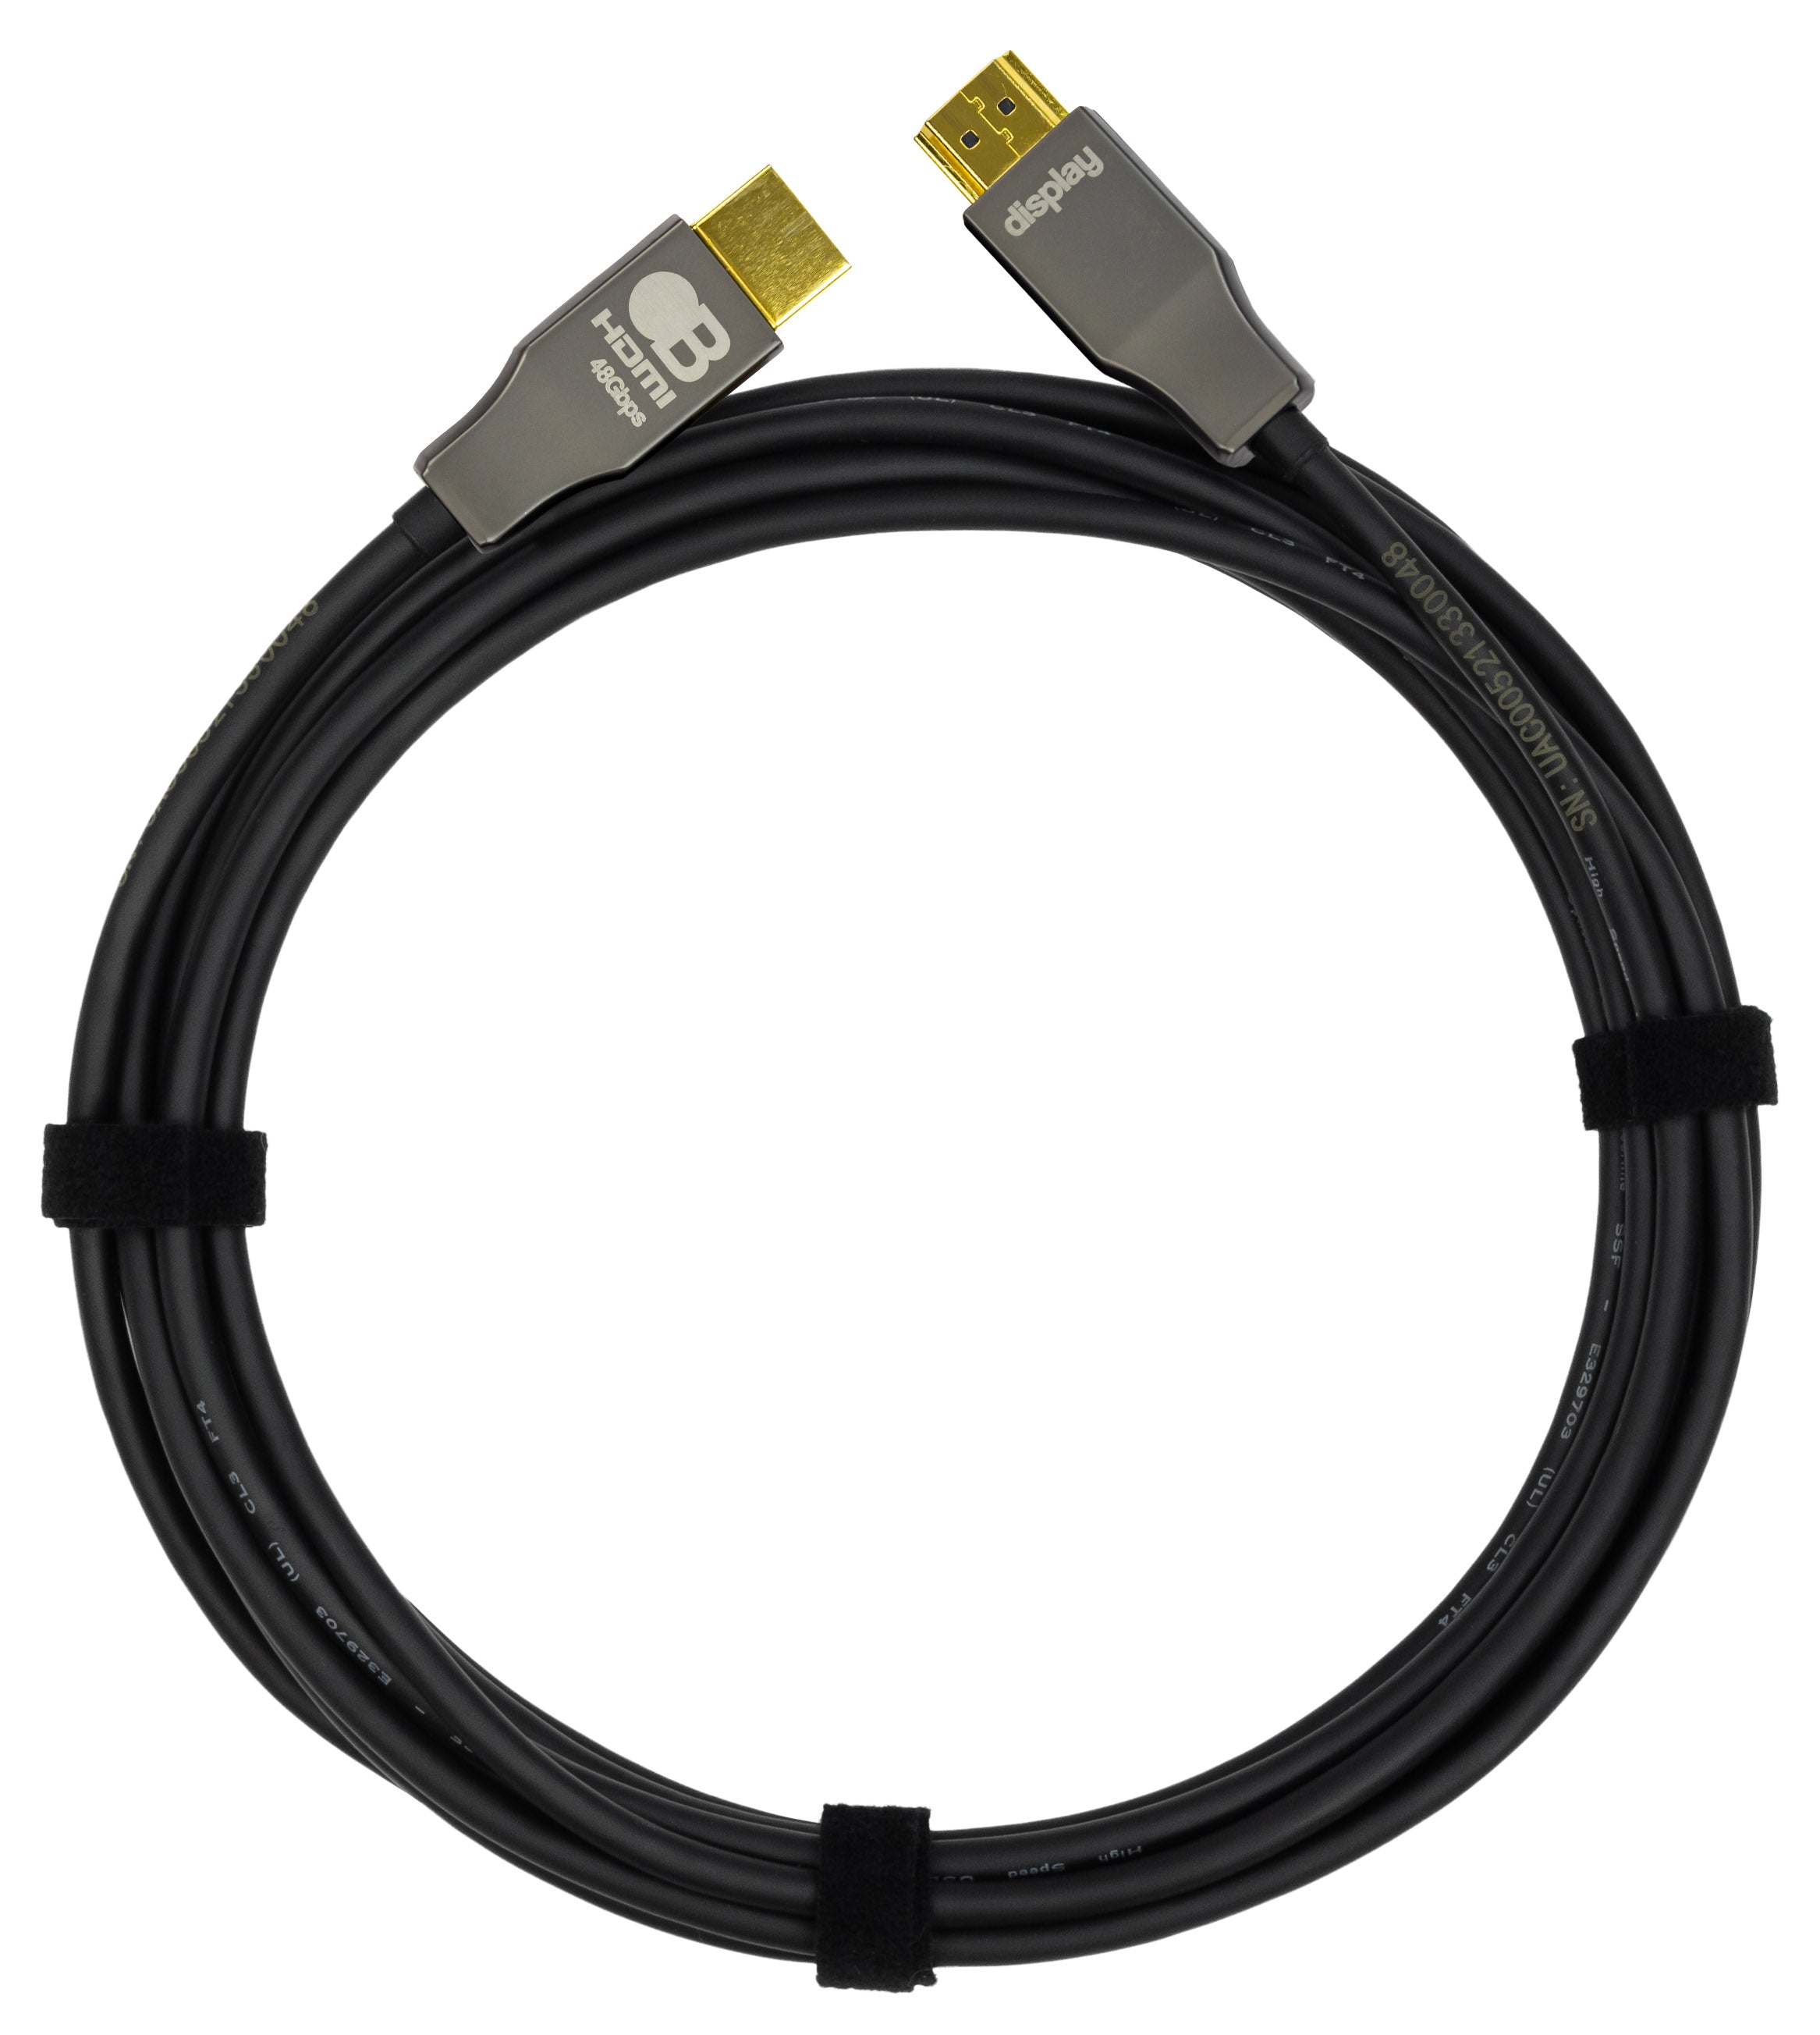 Metra AV EHV-HDG2-050 50M AOC HDMI Cable 48Gbps Ultimate High